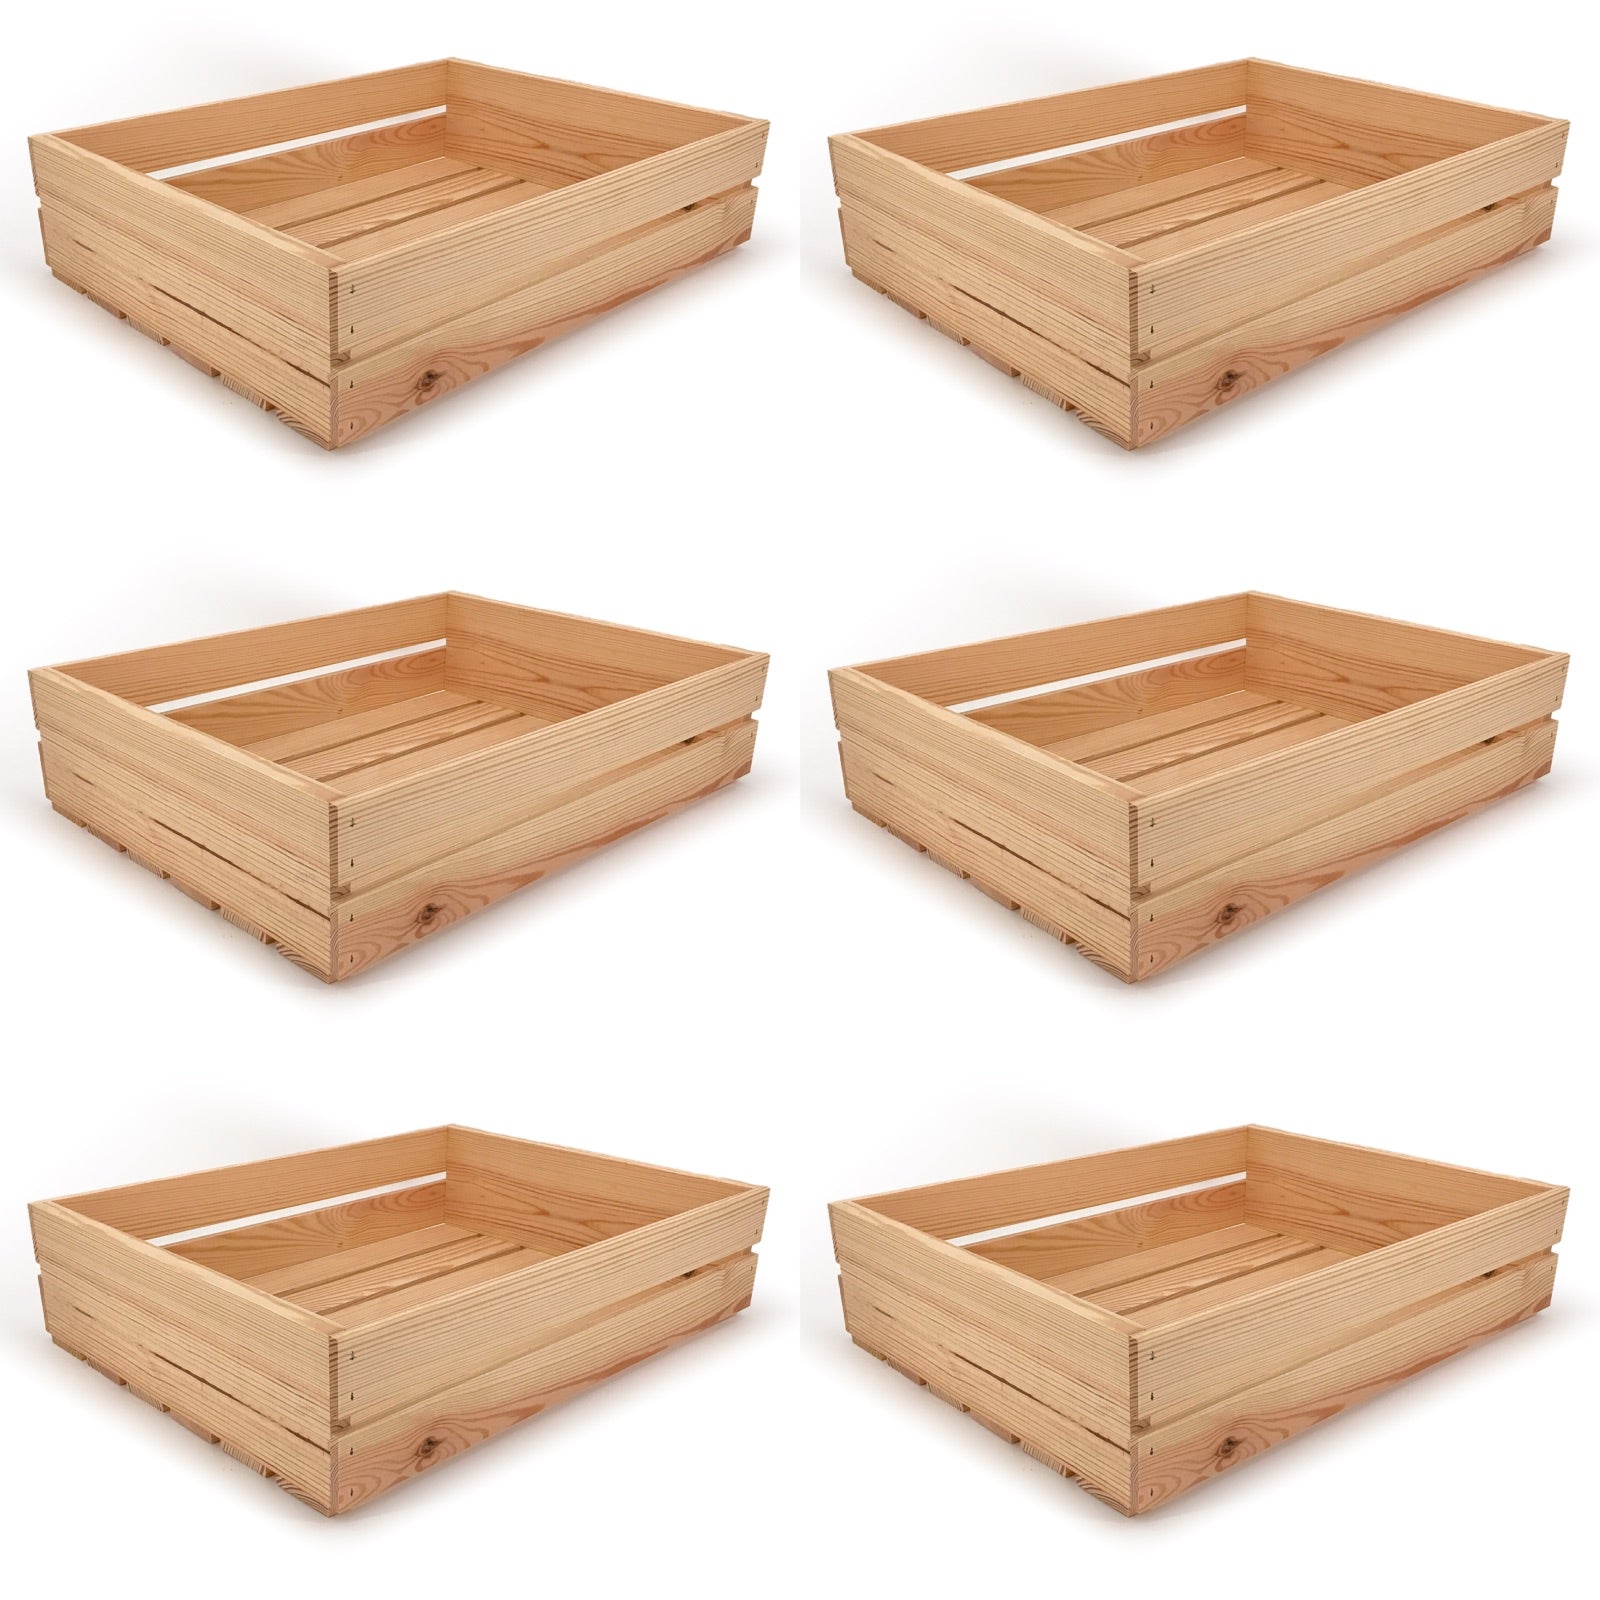 6 Small wooden crates 22x17x5.25